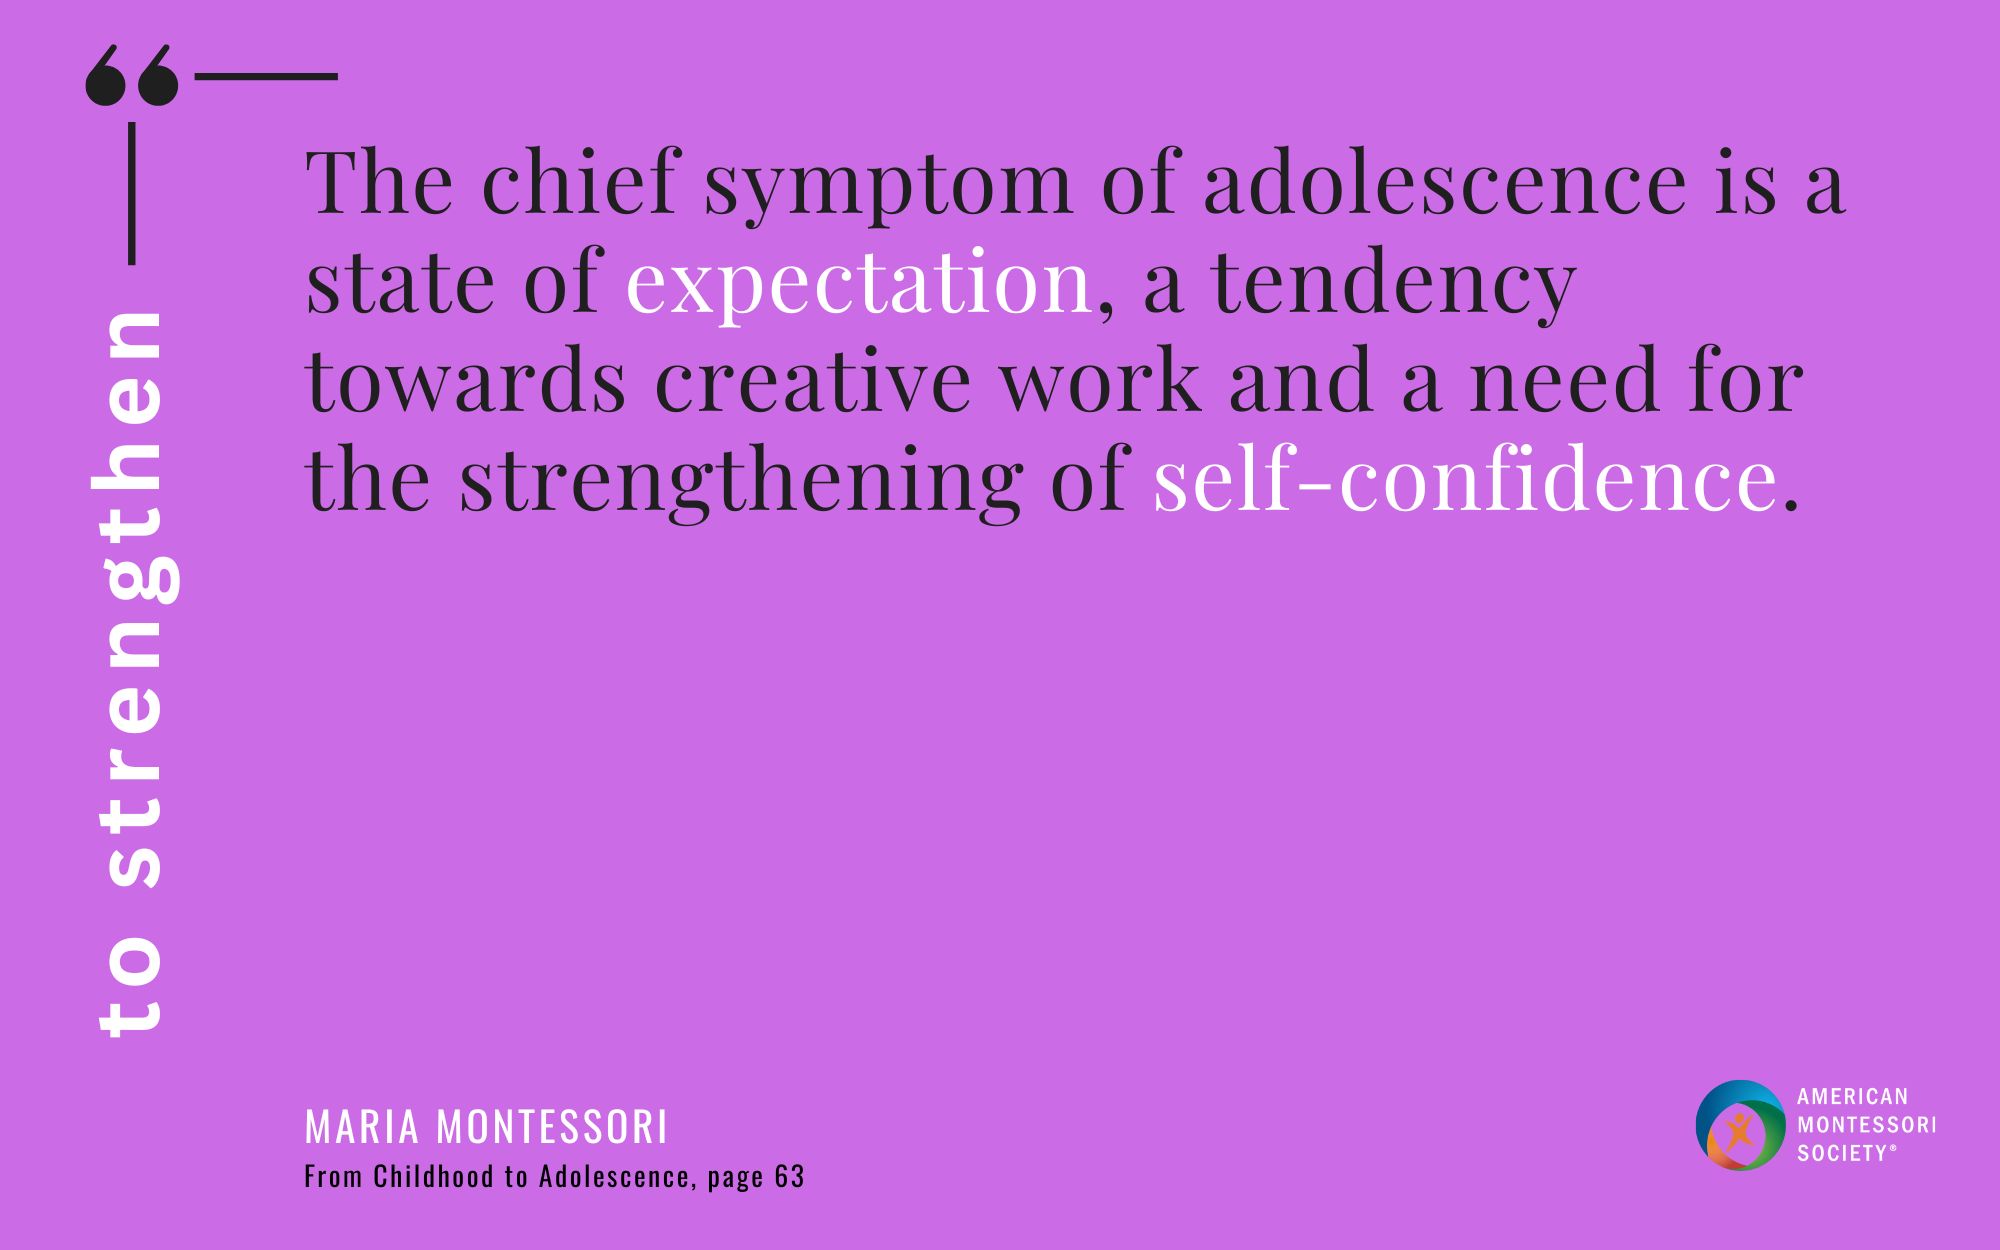 The chief symptom of adolescence is a state of expectation, a tendency towards creative work and a need for the strengthening of self-confidence.